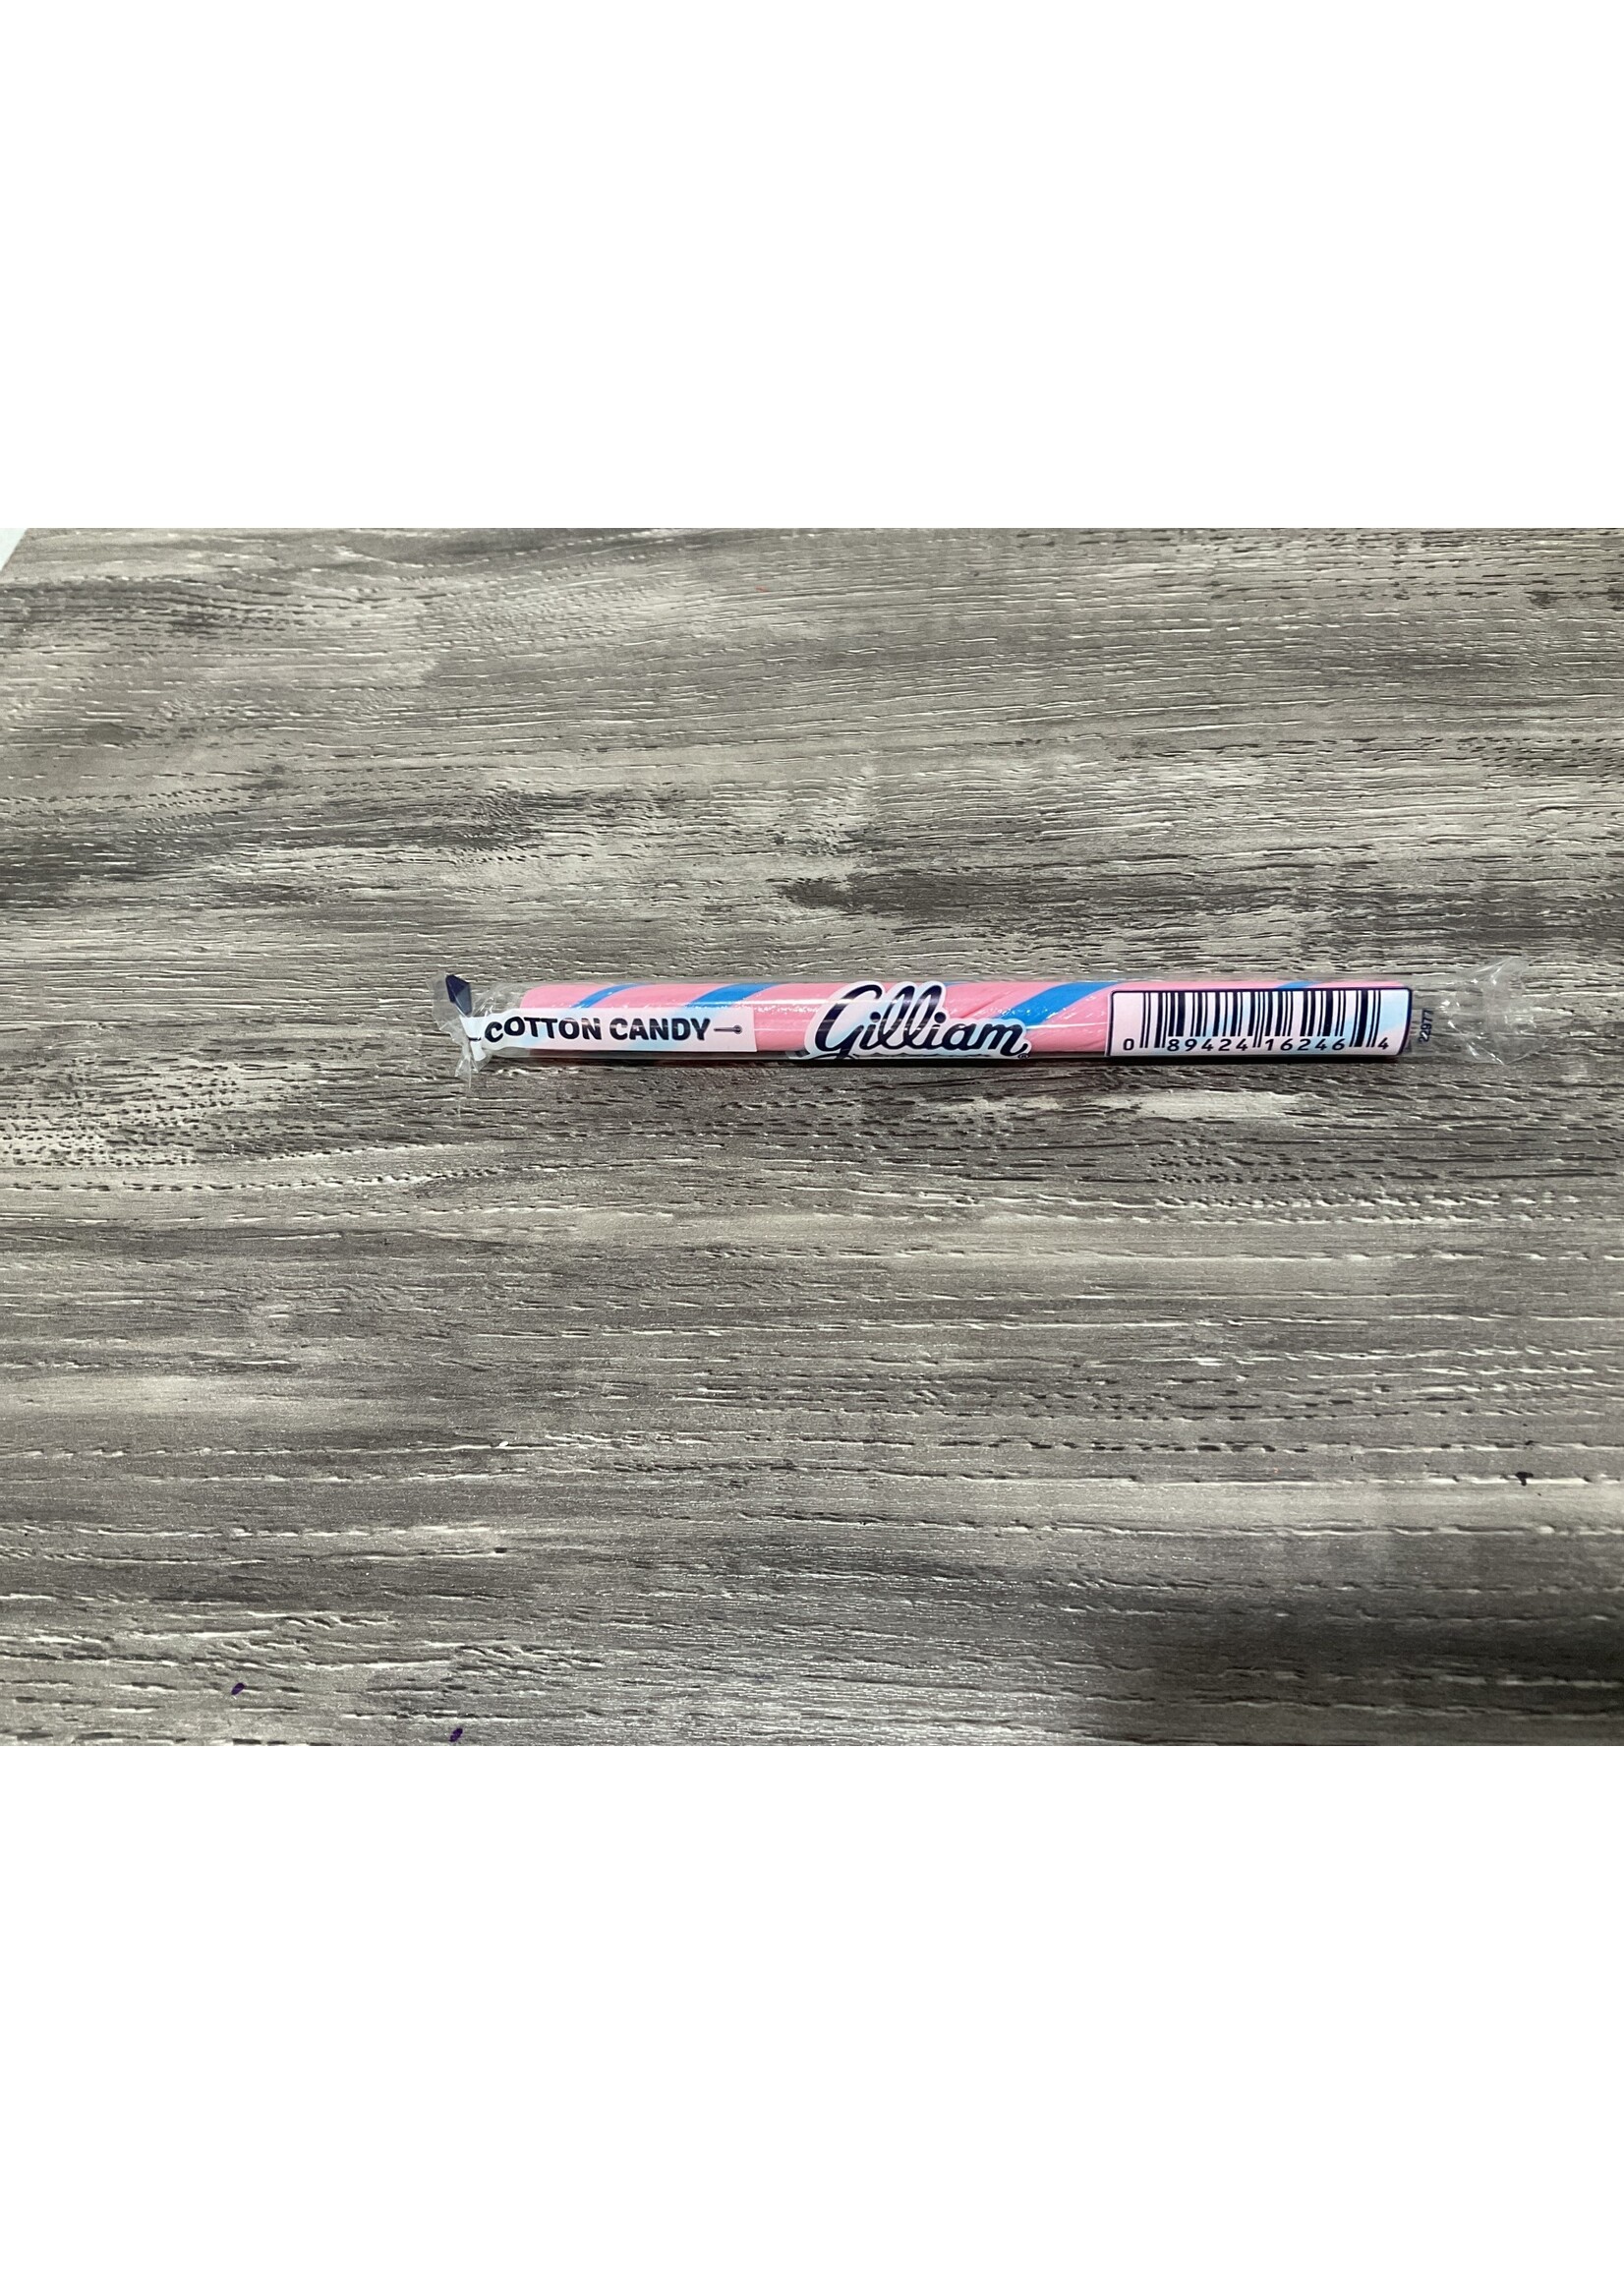 Gilliam/KLM Products Group Stick Candy